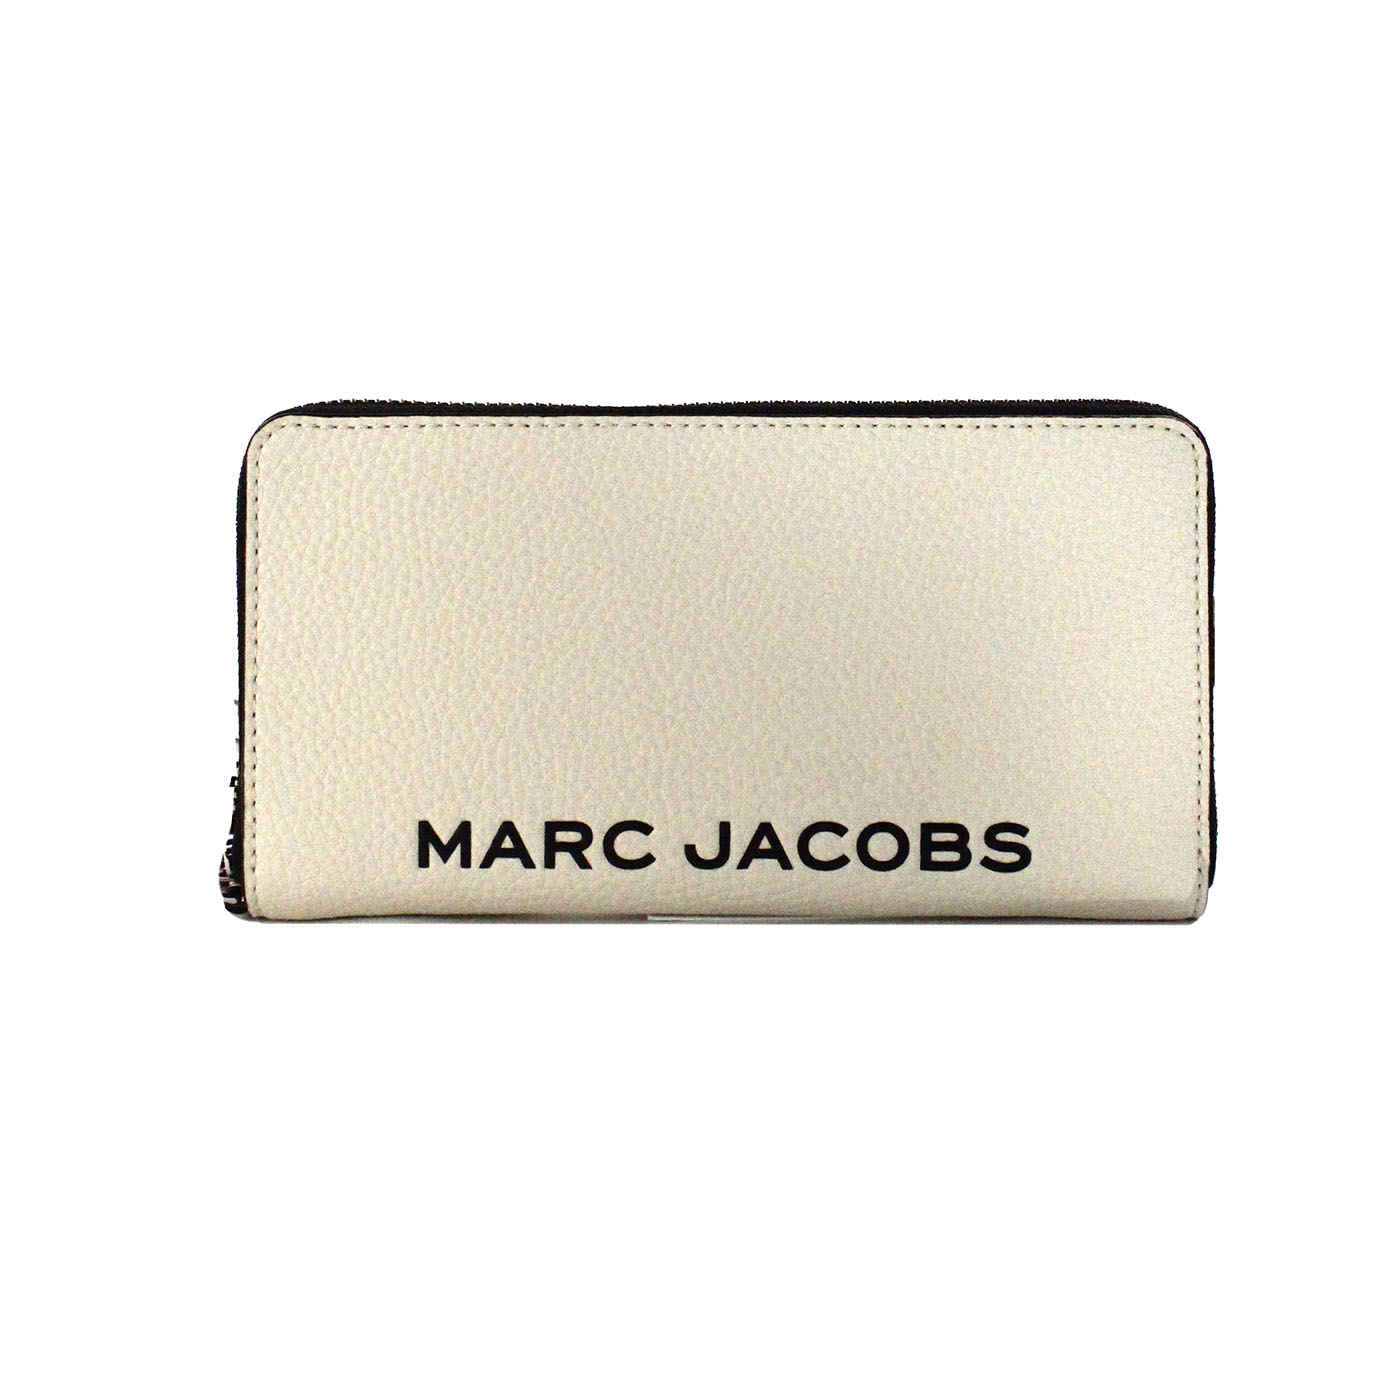 Marc Jacobs Large Marshmallow Pebbled Leather Continental Wristlet Wallet